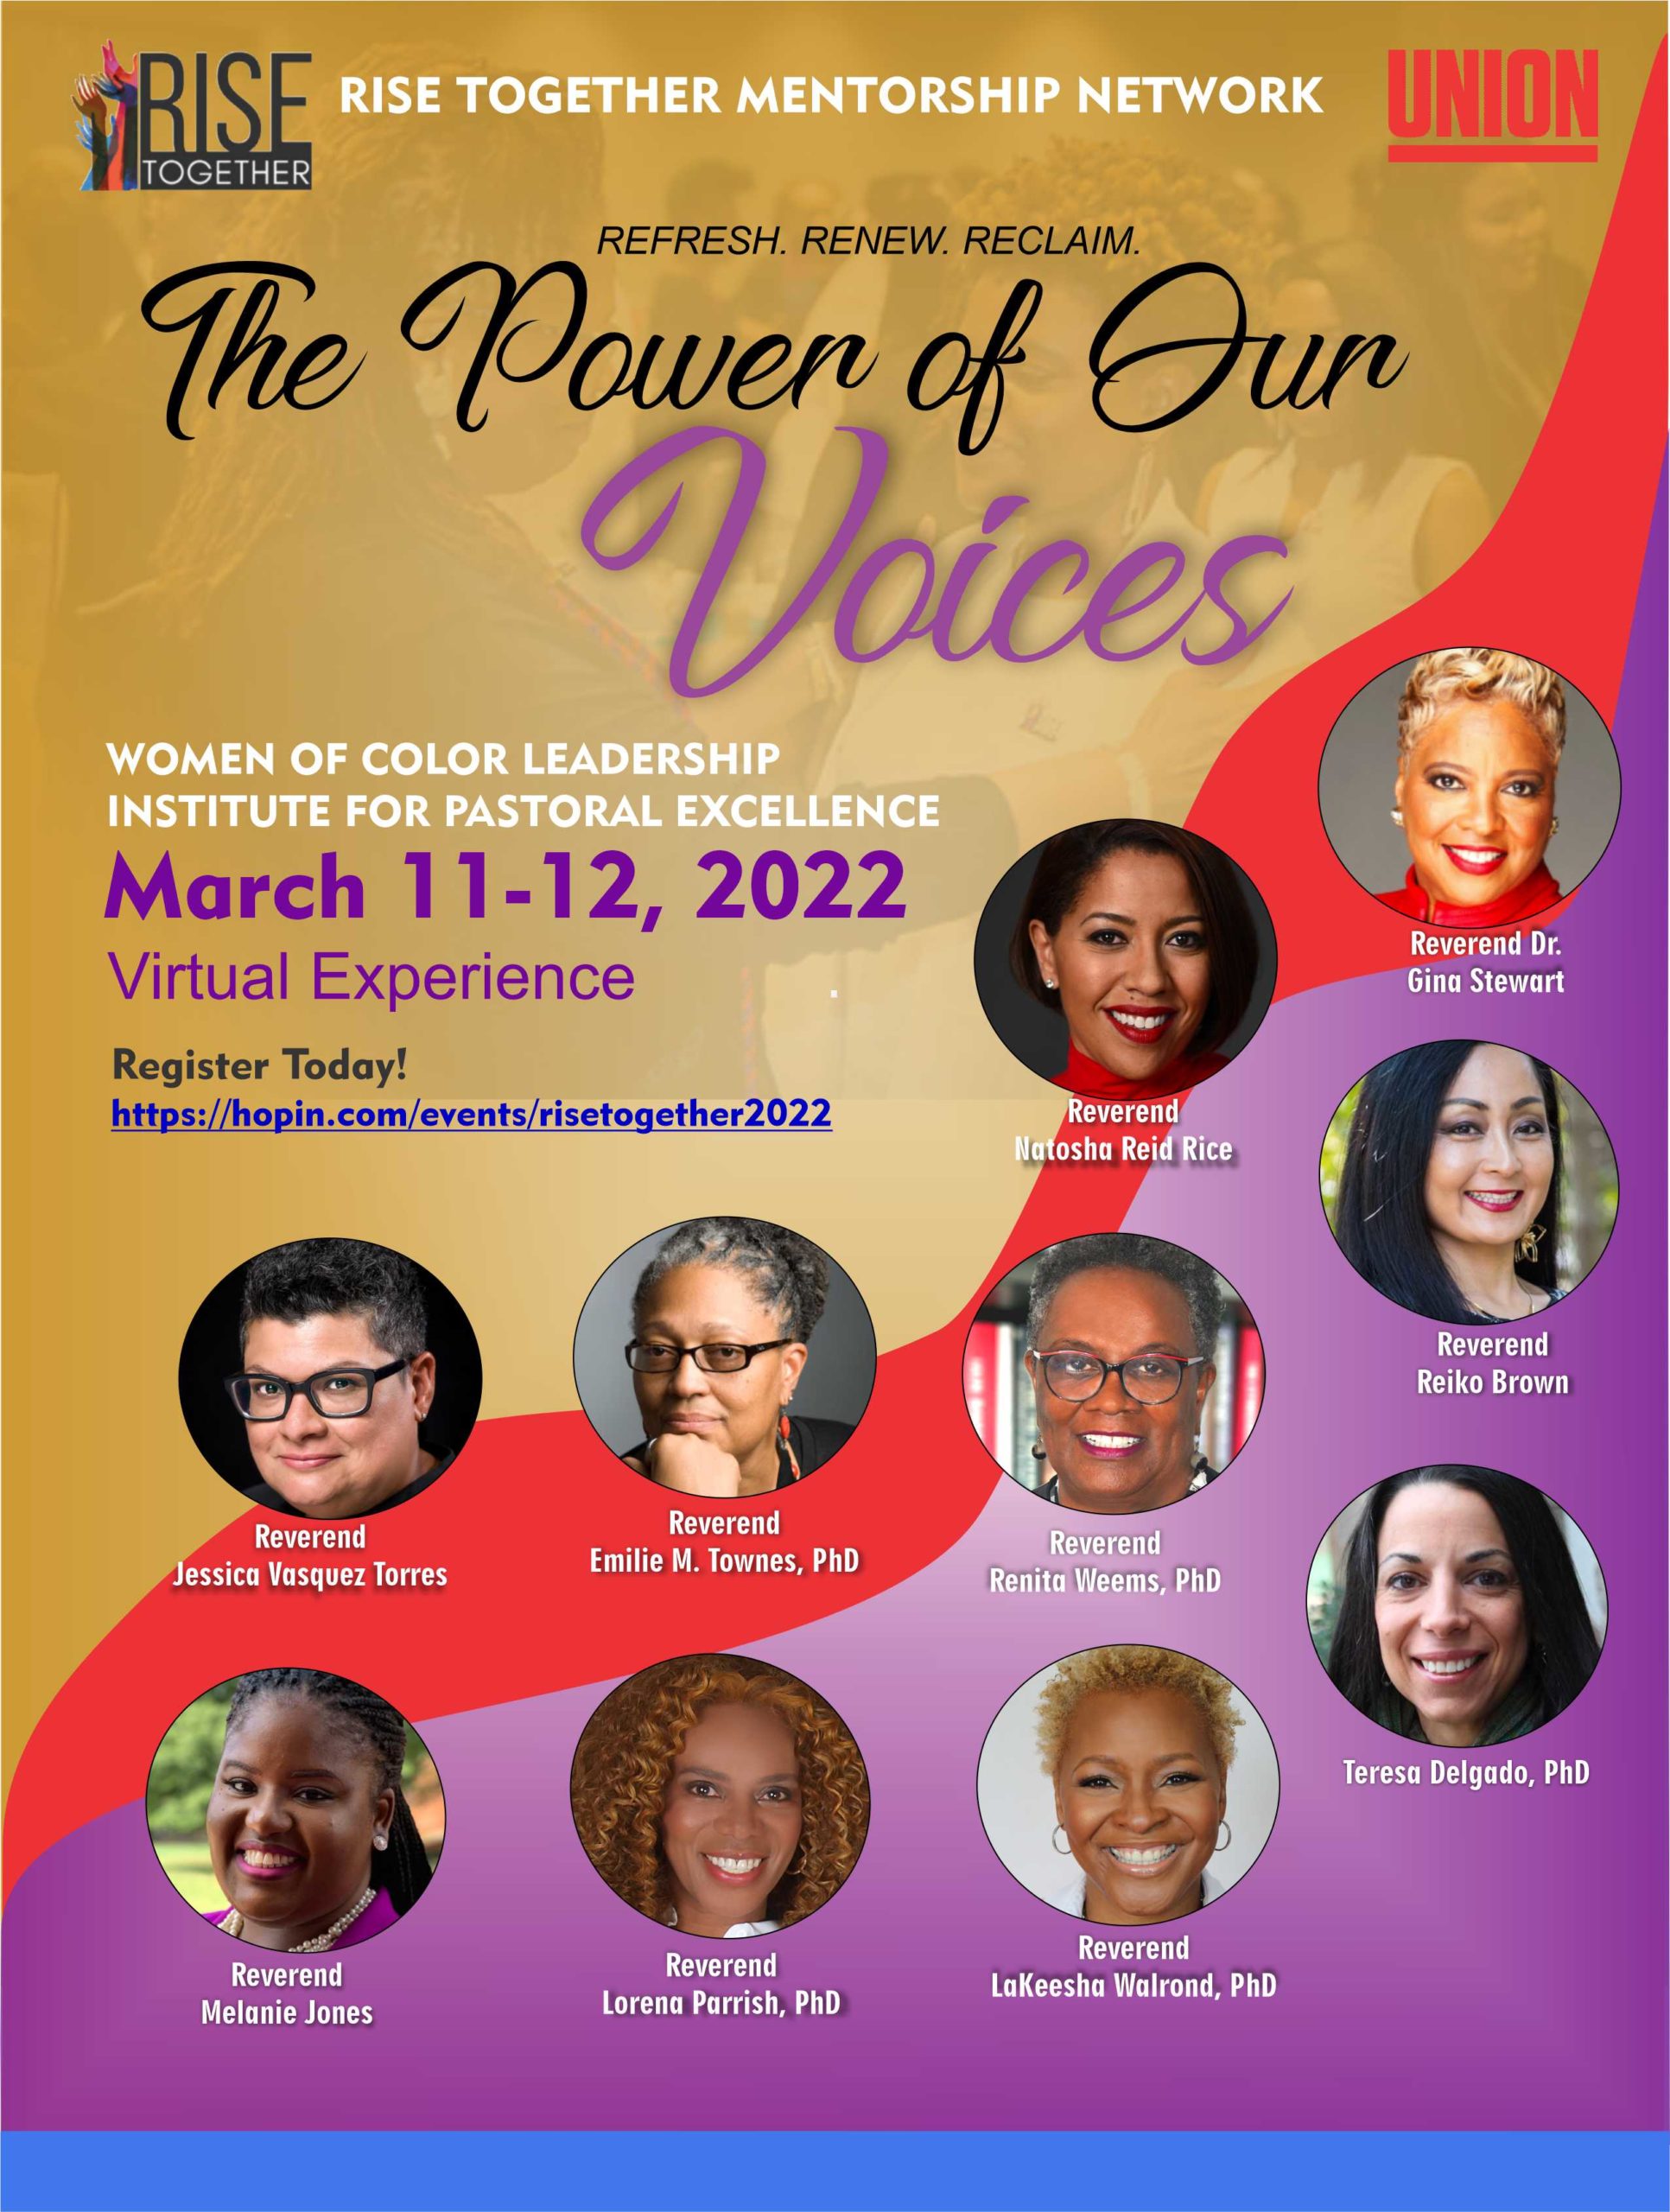 2022 Women of Color Leadership Institute for Pastoral Excellence @ Online Event